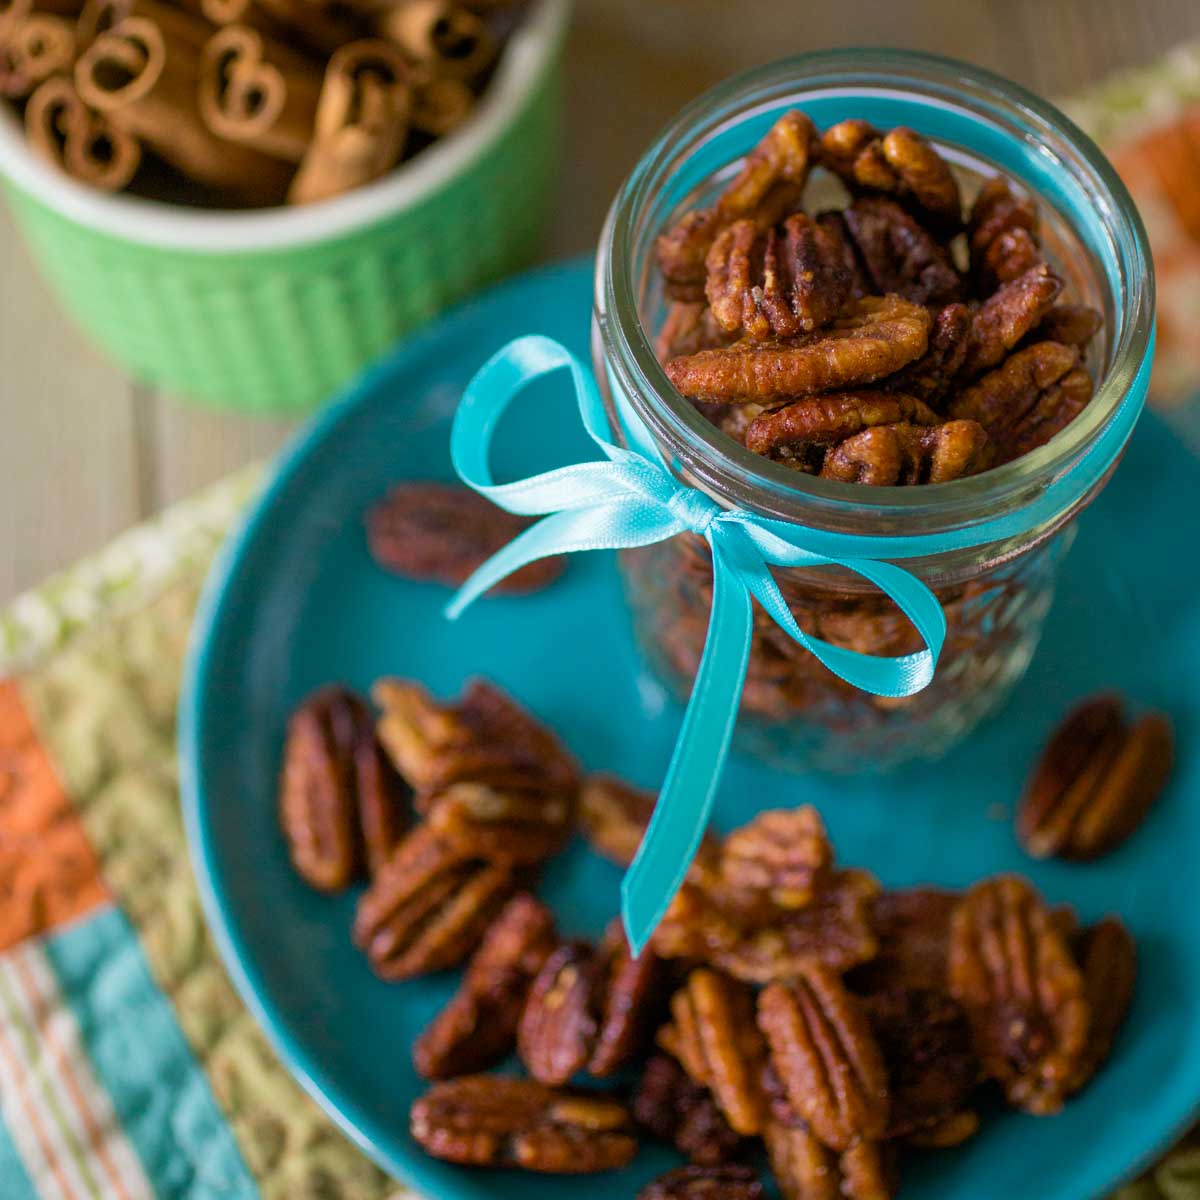 A mason jar filled with spiced pecans has a blue ribbon tied around it and sits on a blue plate with more pecans sprinkled around.